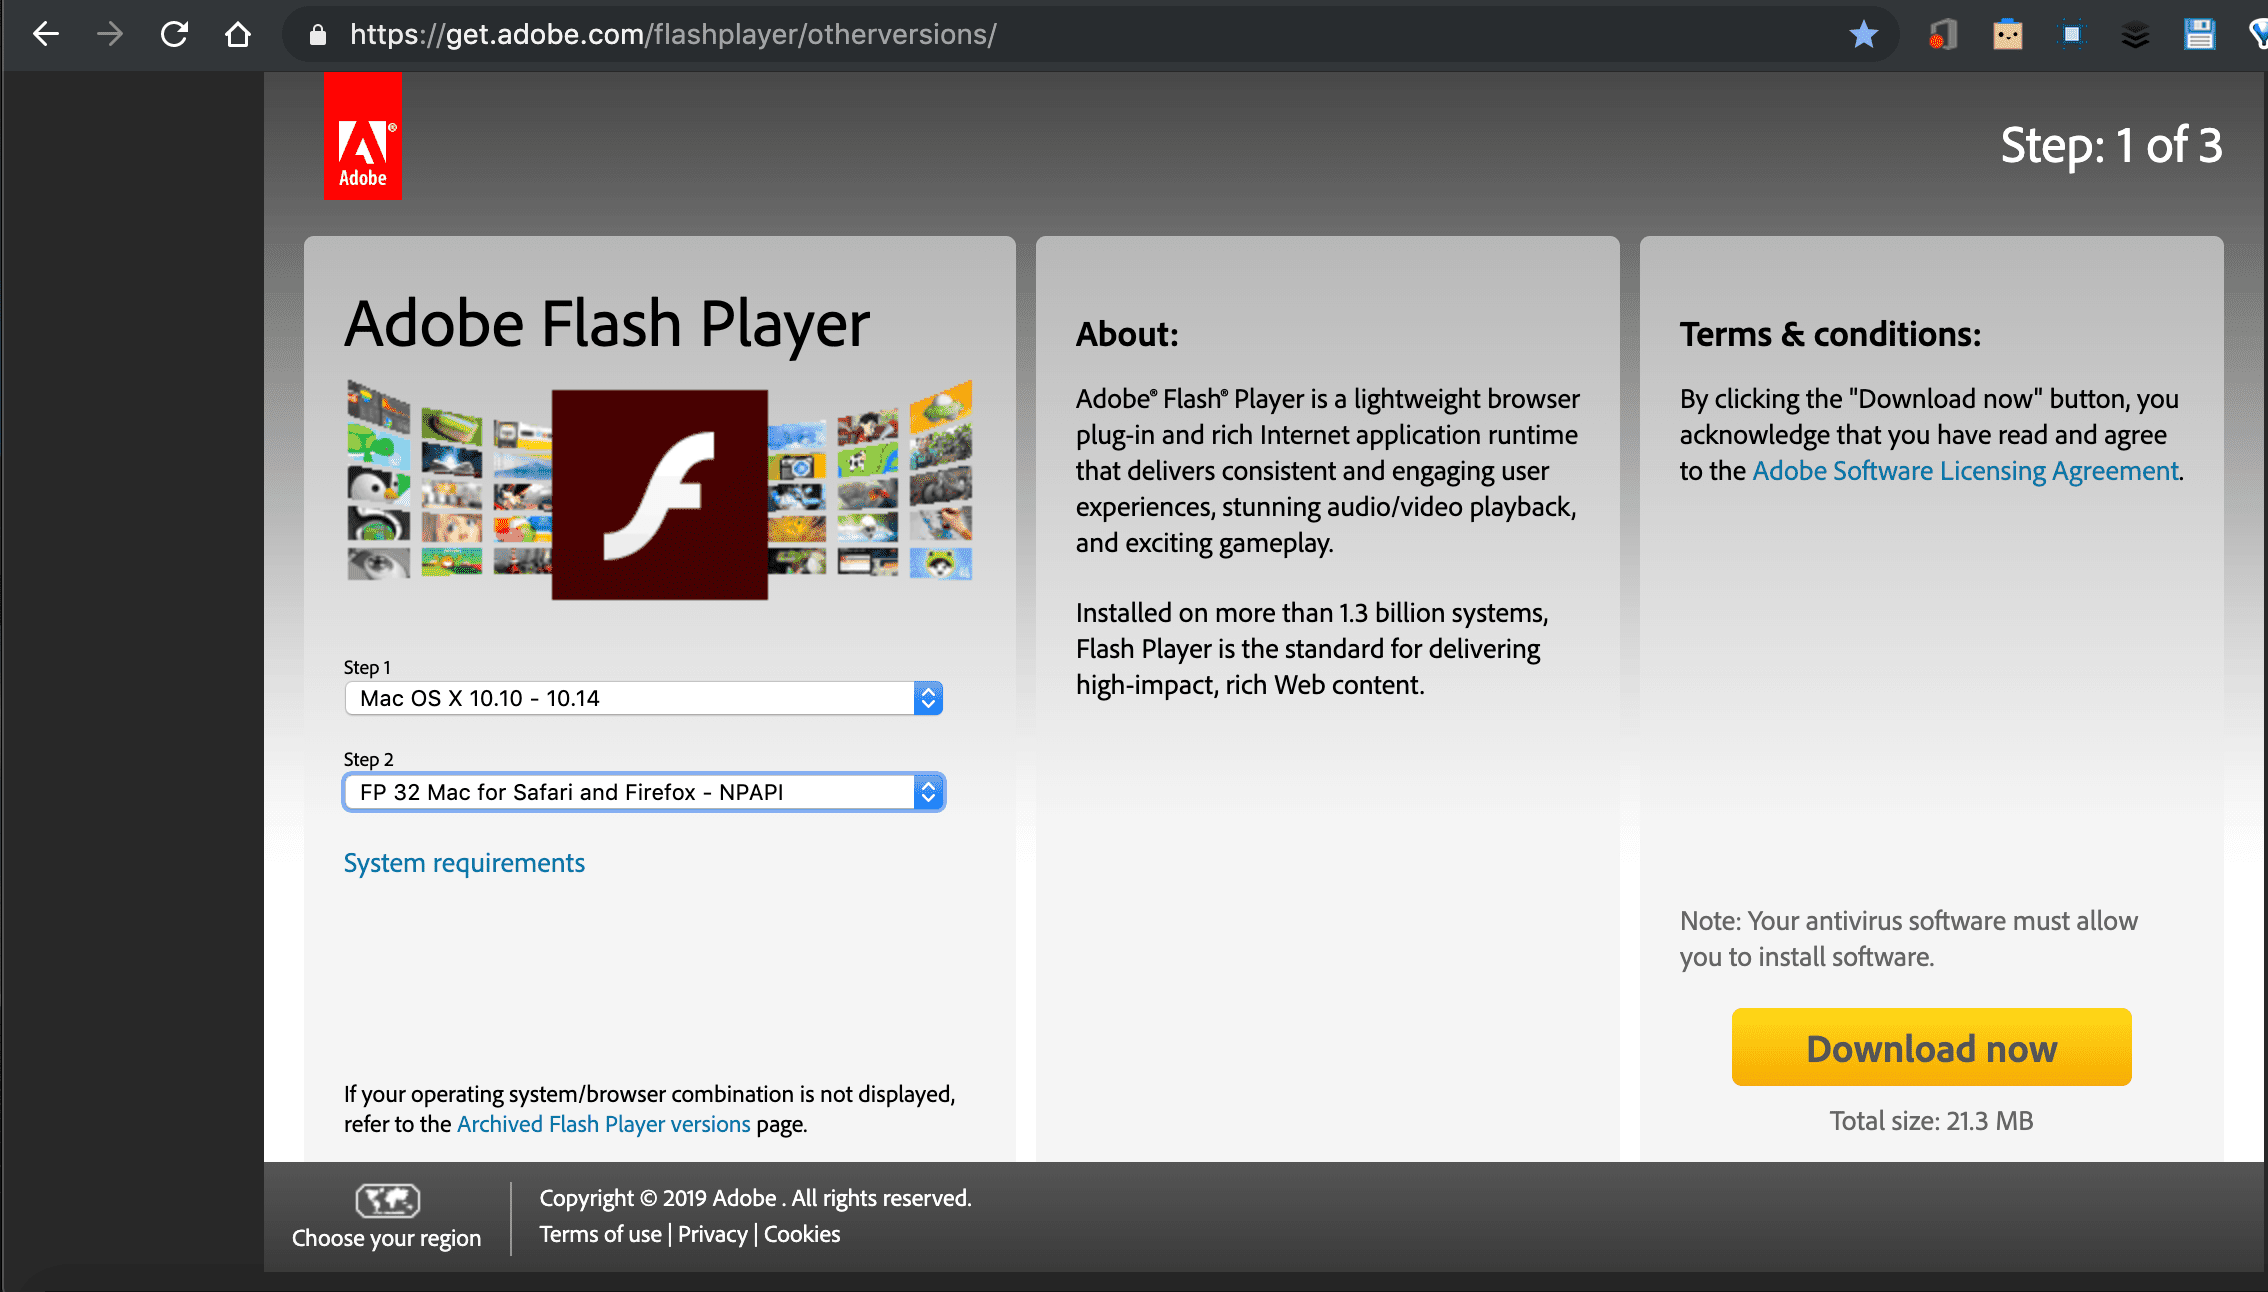 Flash Player Update For Mac Os X 10.6.8